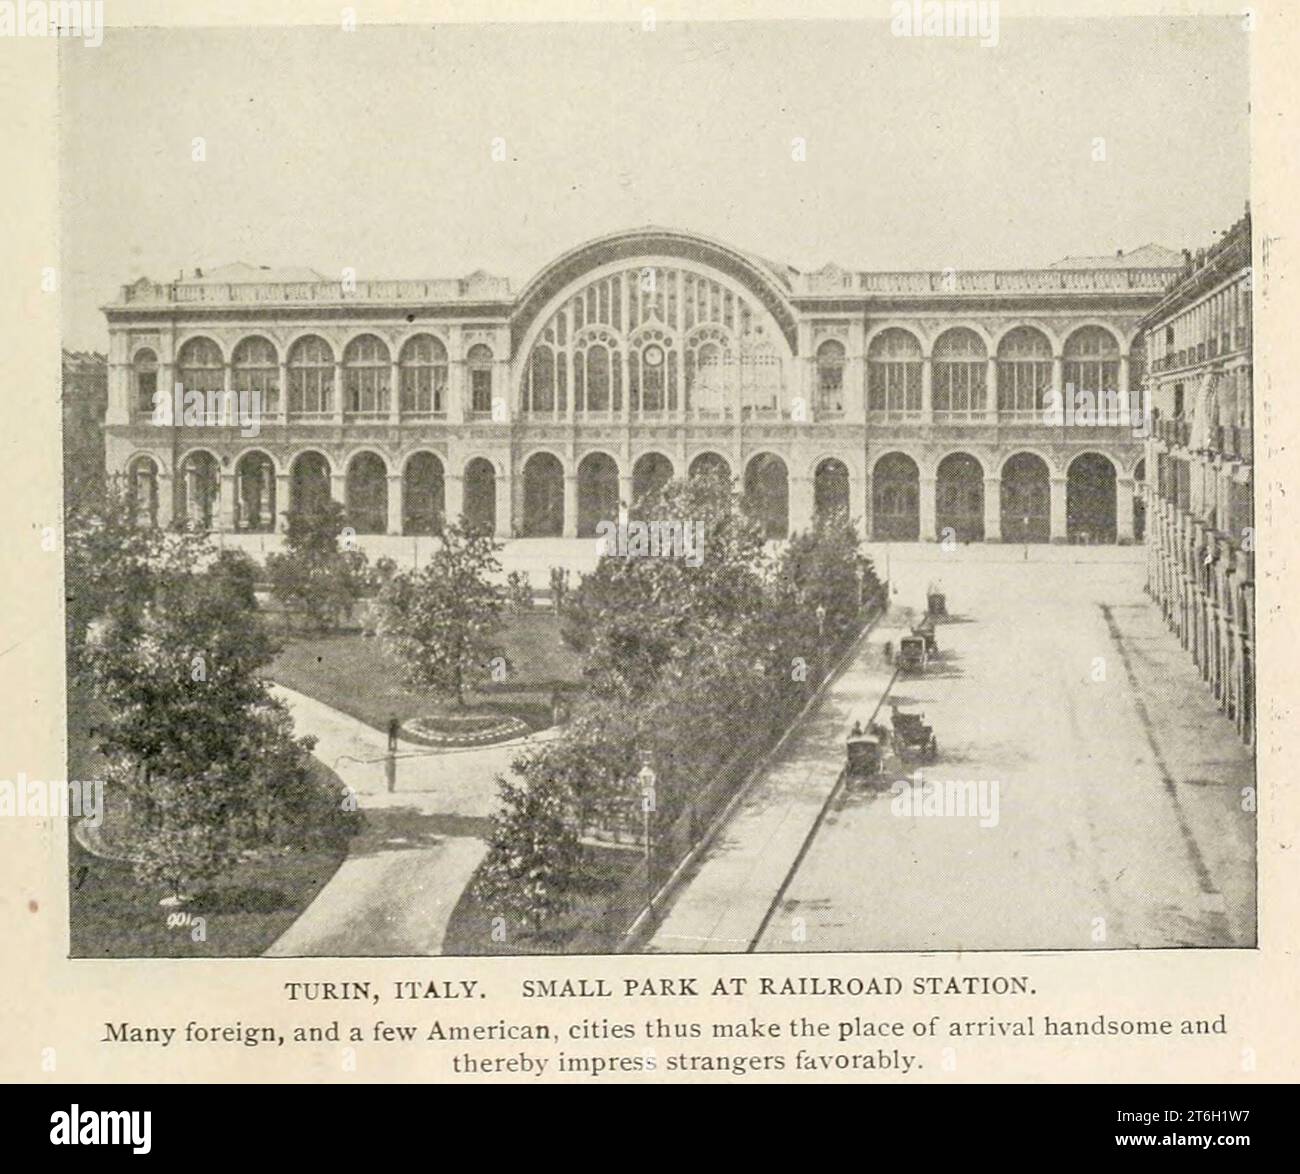 TURIN, ITALY, SMALL PARK AT RAILROAD STATION. Many foreign, and a few American, cities thus make the place of arrival handsome and thereby impress strangers favorably. from the Article THE POSITIVE VALUE OF QUIET AND BEAUTIFUL STREETS. By J. W. Howard. from The Engineering Magazine DEVOTED TO INDUSTRIAL PROGRESS Volume XII October 1896 to March 1897 The Engineering Magazine Co Stock Photo